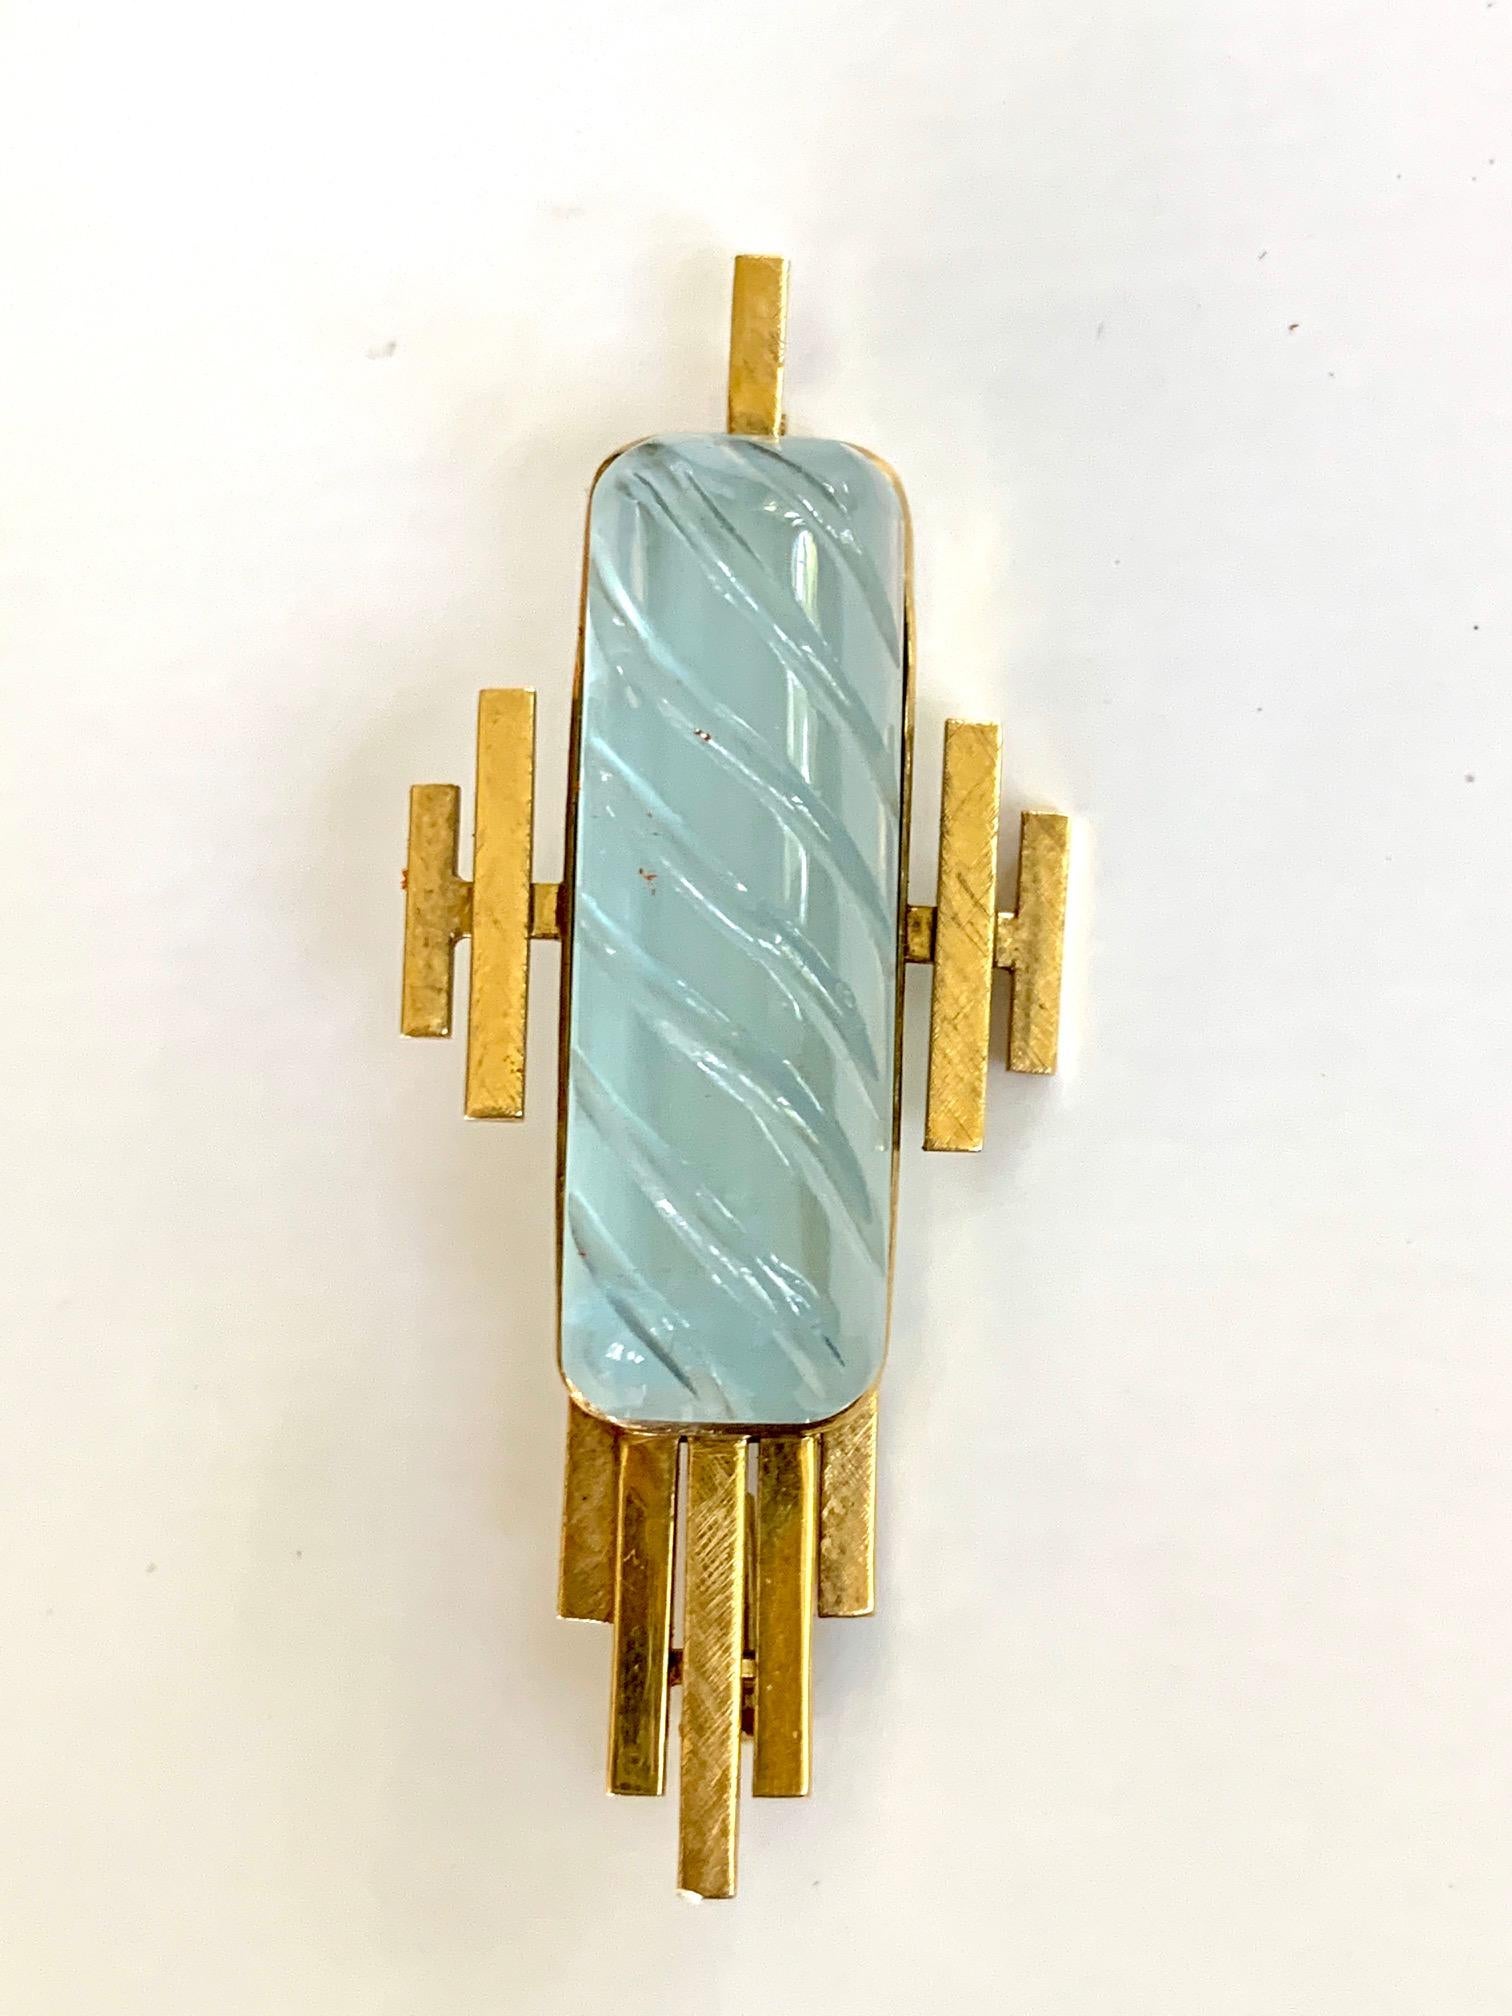 This beautiful Art Deco Style design 18k gold brooch, can also be worn as a pendant.  There is a bale on the back side to your favorite chain through to wear as a lovely drop pendant. 

The pin mechanism is in perfect working order.

it is stamped